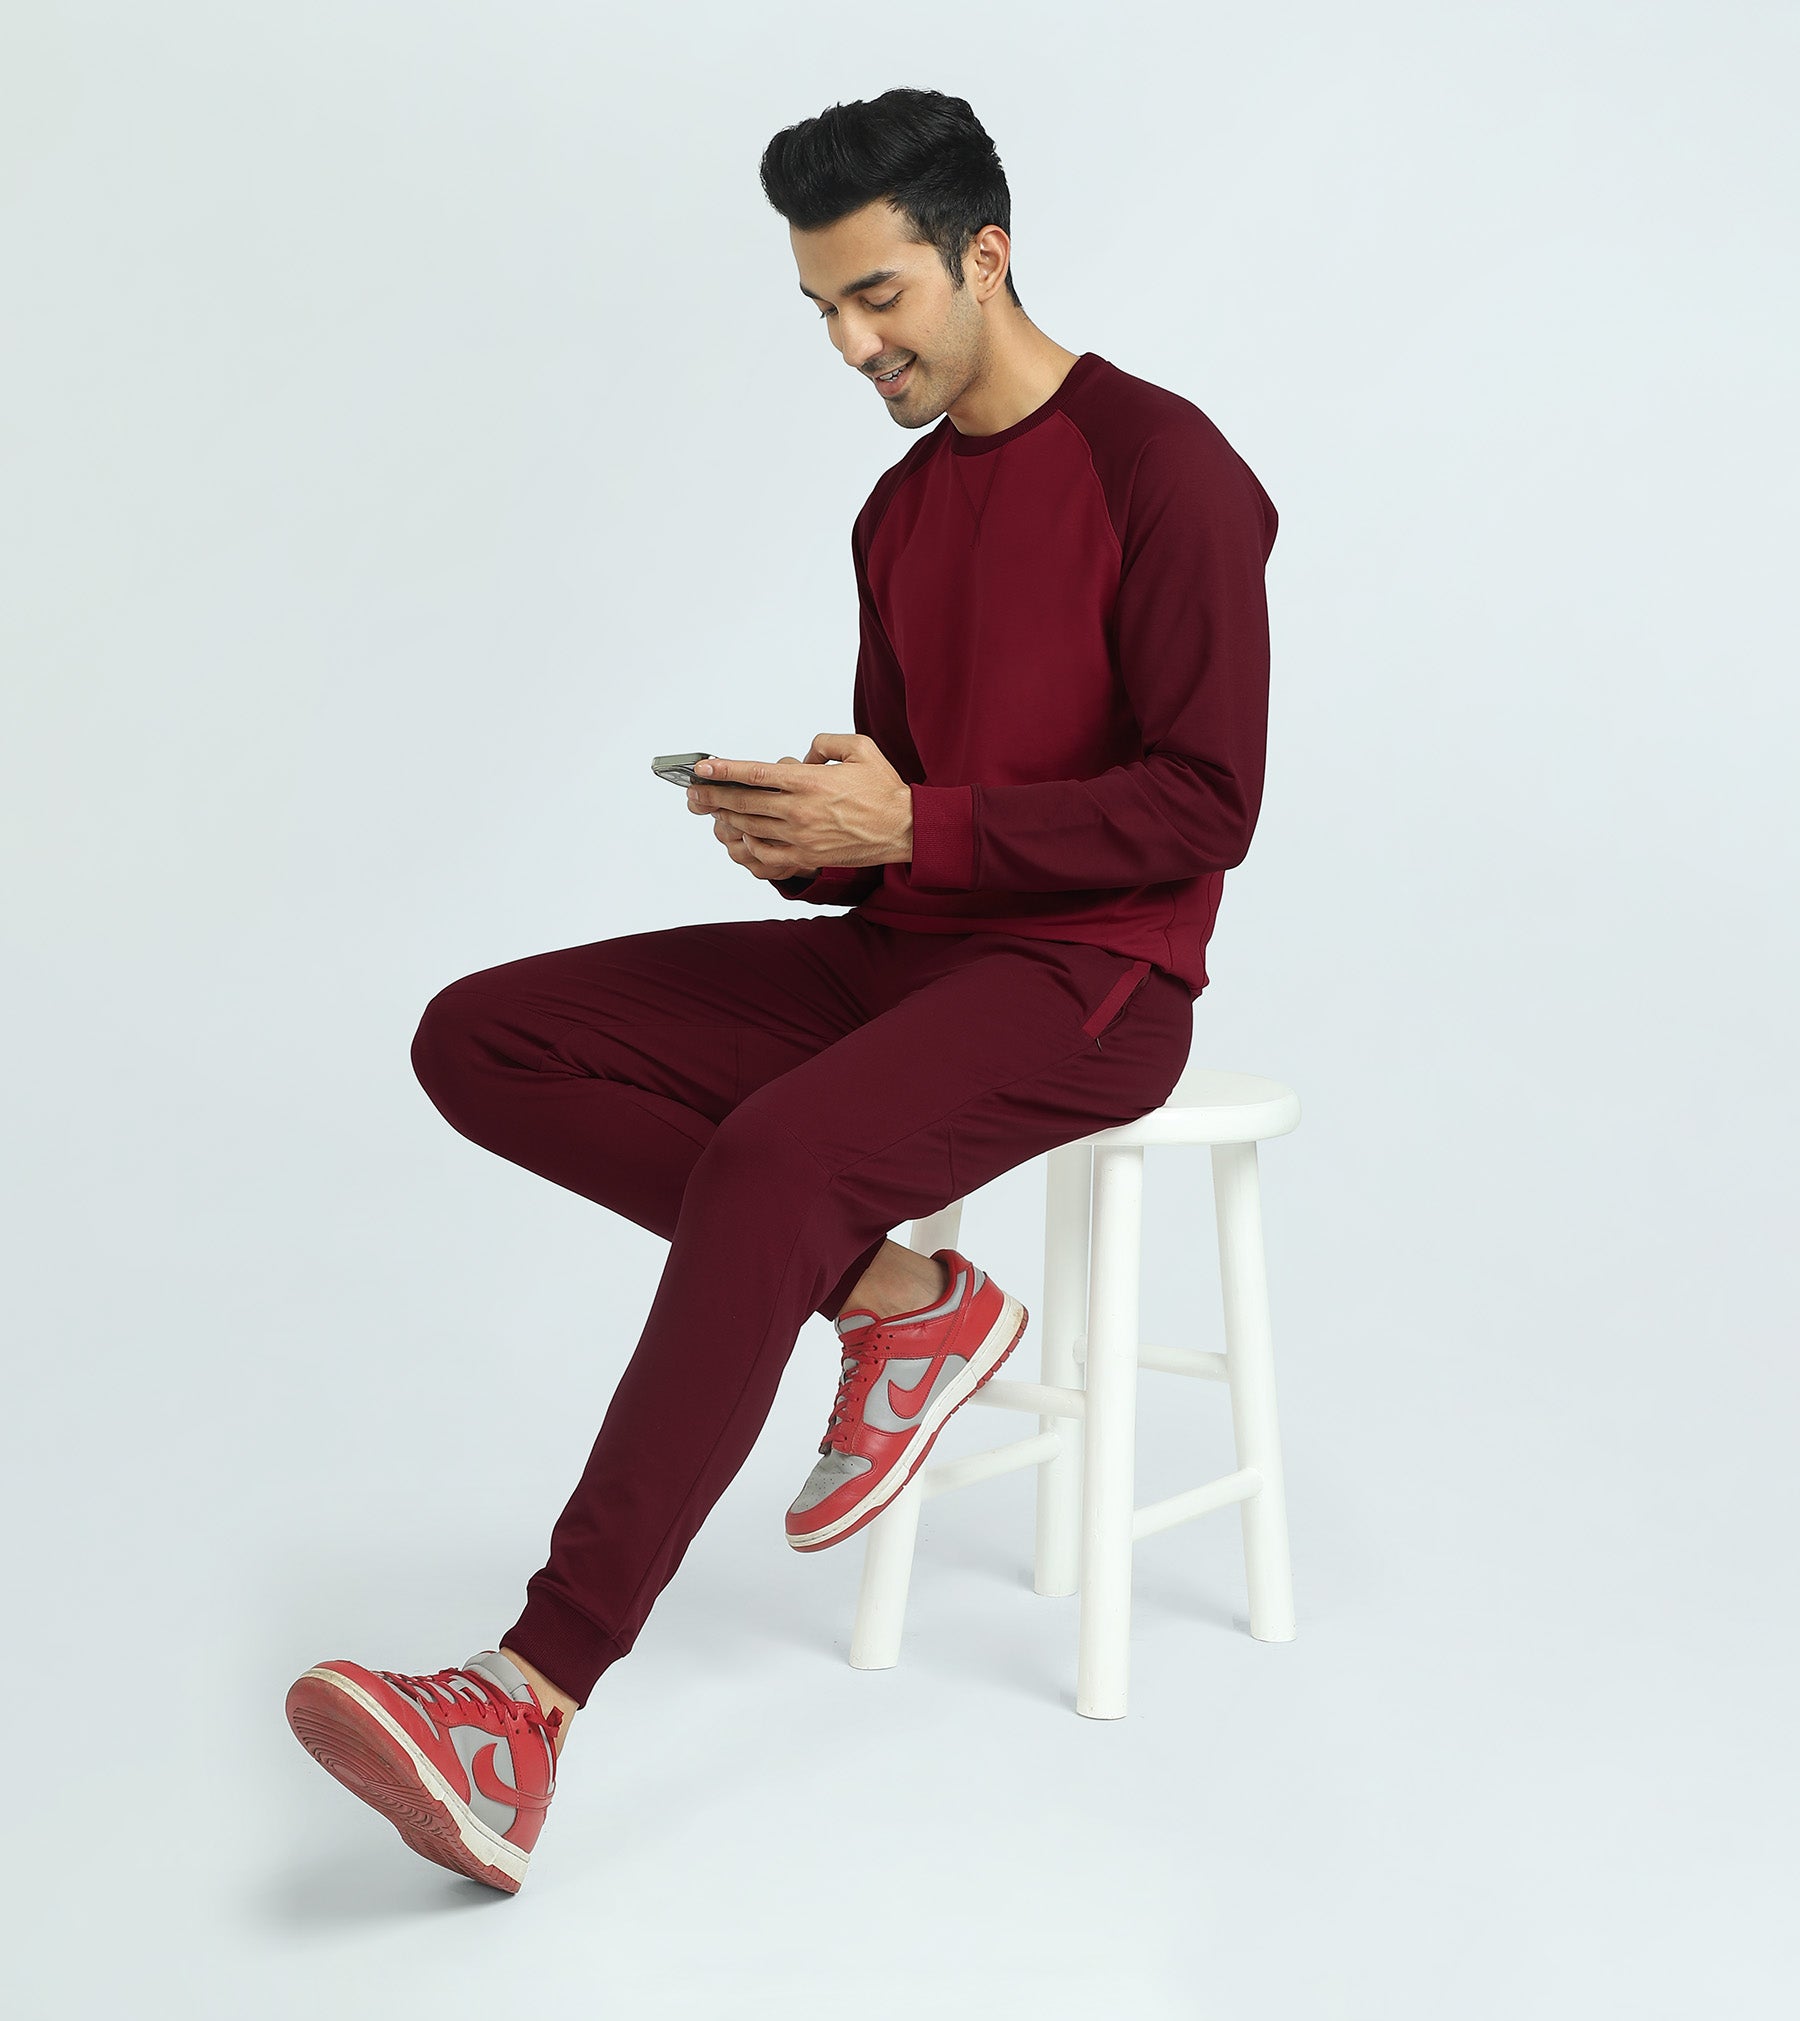 Quest French Terry Cotto-Blend Sweatshirt And Joggers Co-ord Set For Men Scarlet Red - XYXX Mens Apparels